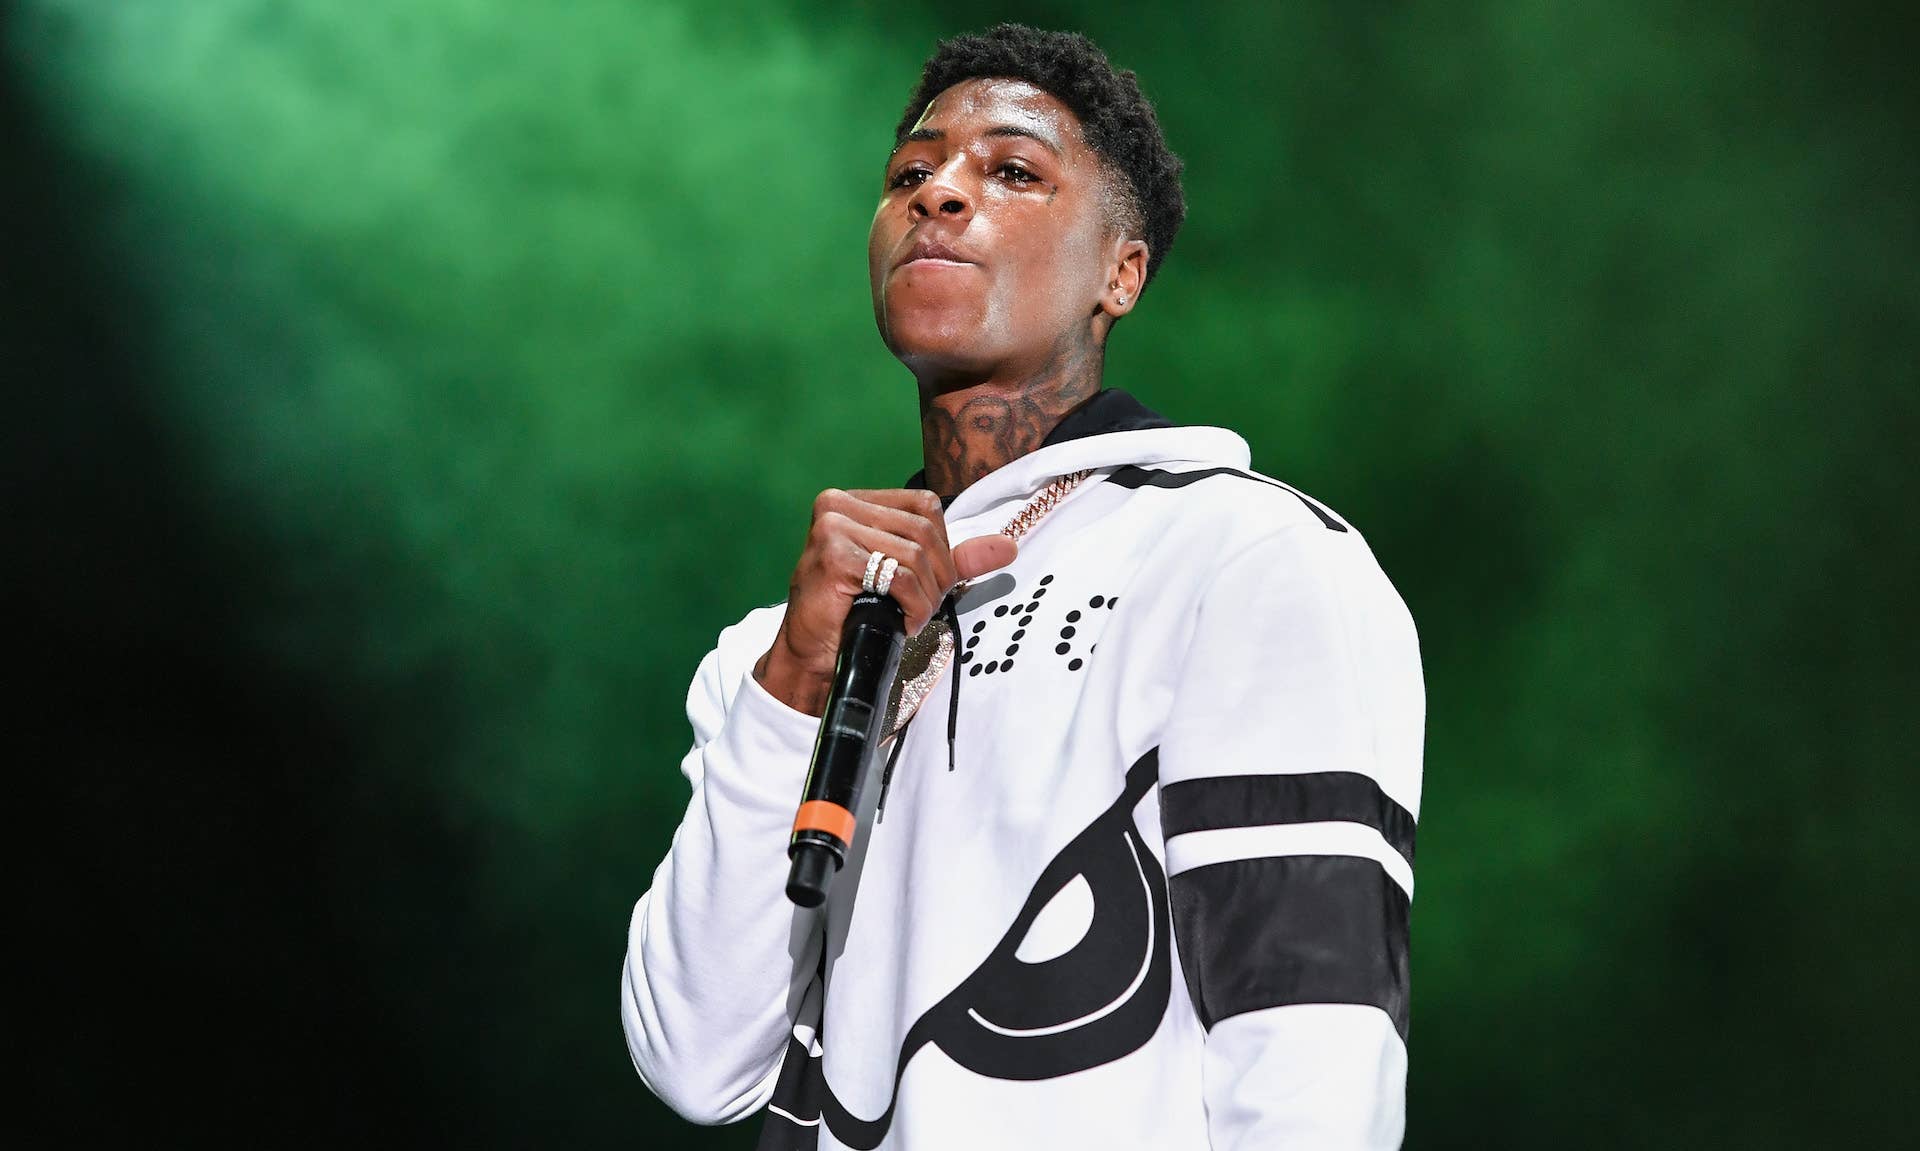 YoungBoy Never Broke Again performs at Lil Weezyana Fest